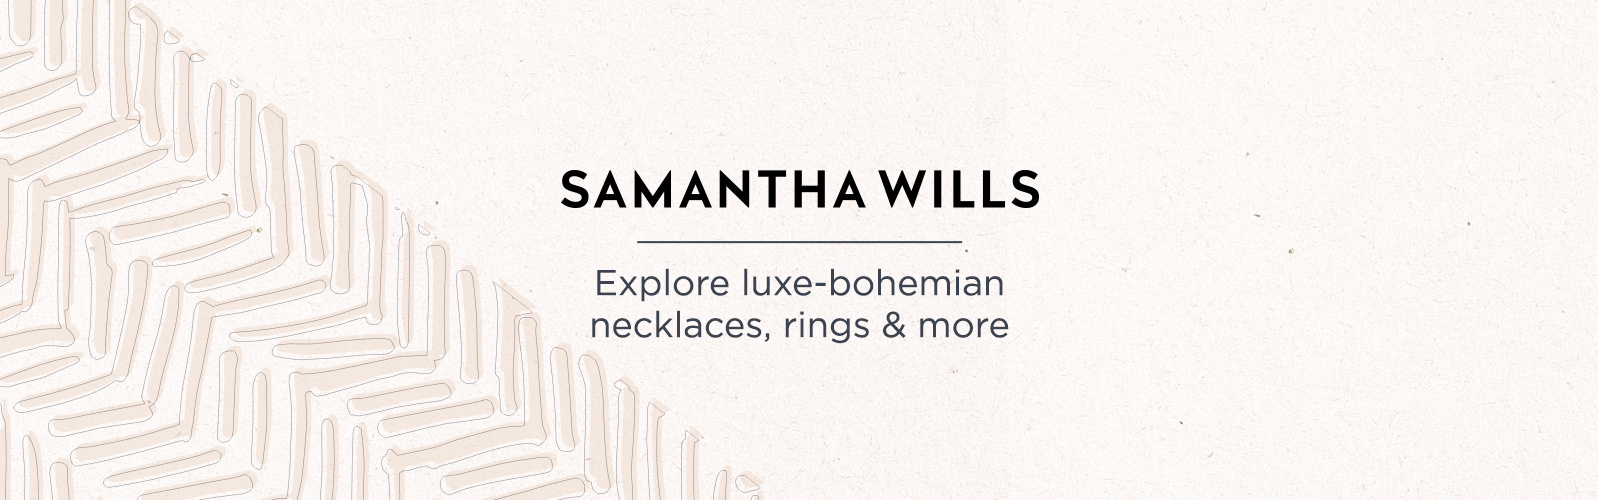 Samantha Wills Explore luxe-bohemian necklaces, rings & more